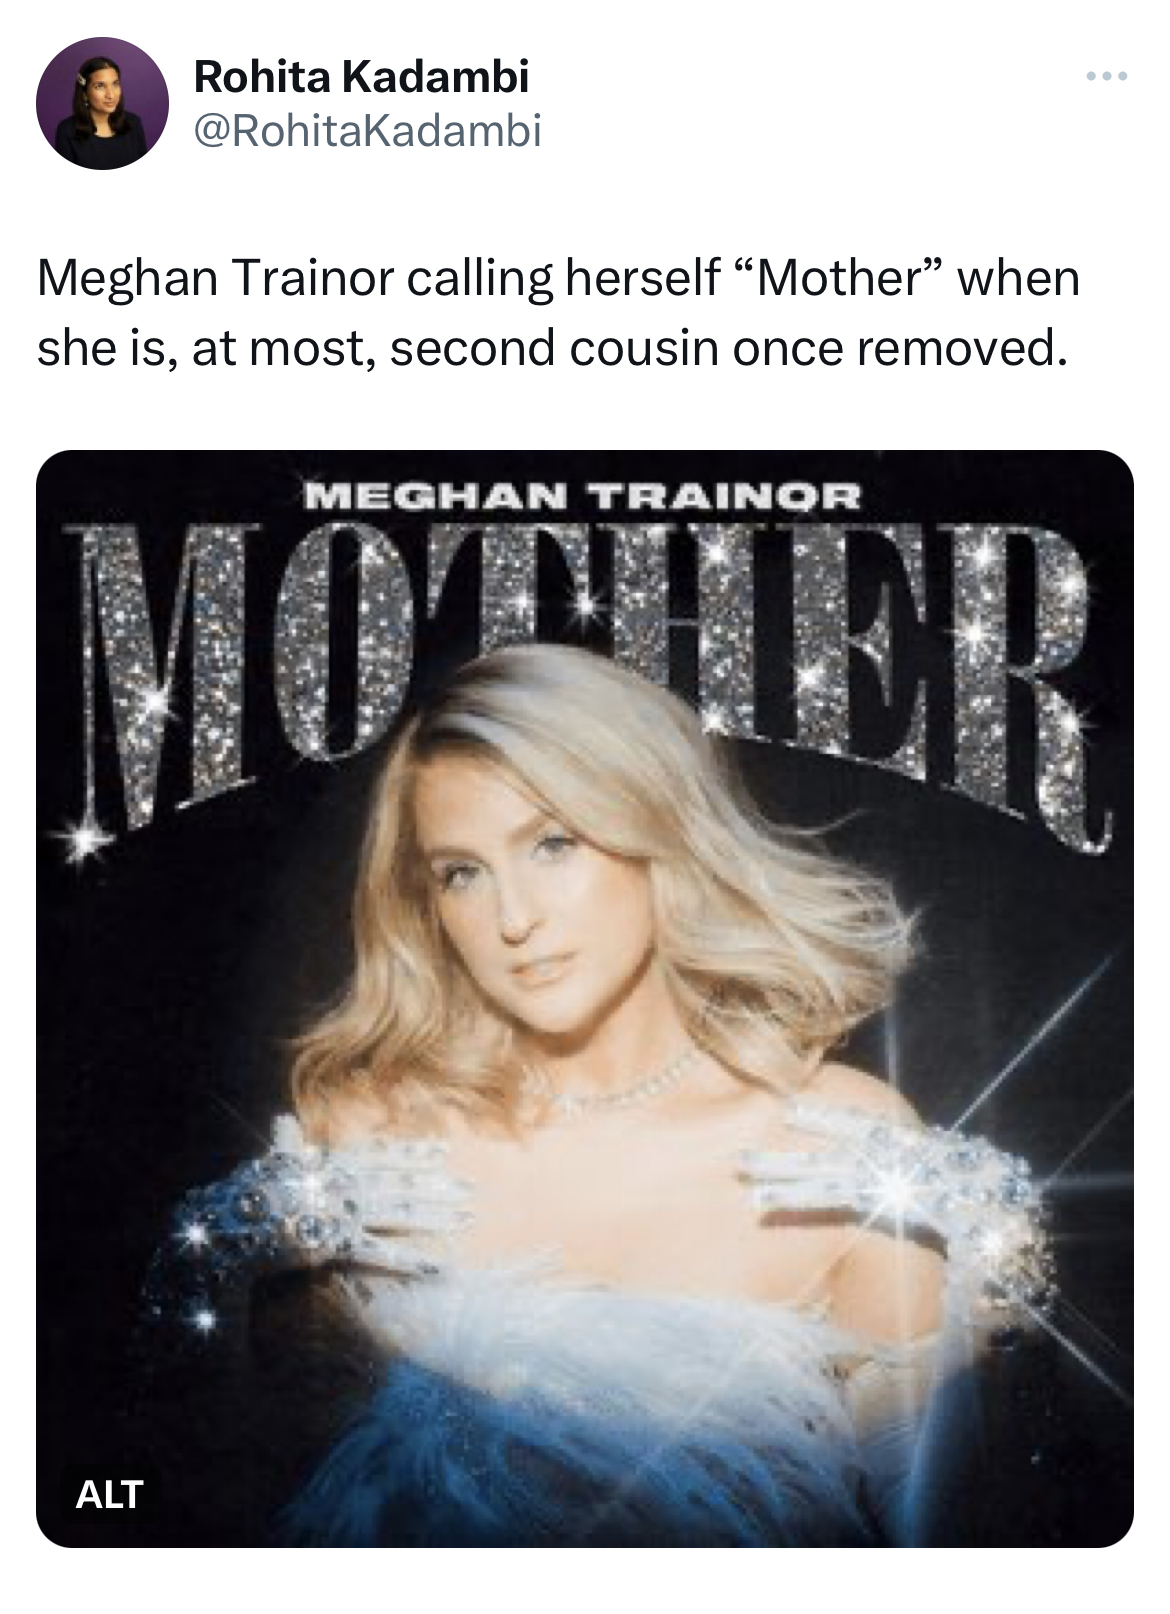 tweets roasting celebs - Meghan Trainor - 4x Rohita Kadambi Meghan Trainor calling herself "Mother" when she is, at most, second cousin once removed. Alt Meghan Trainor